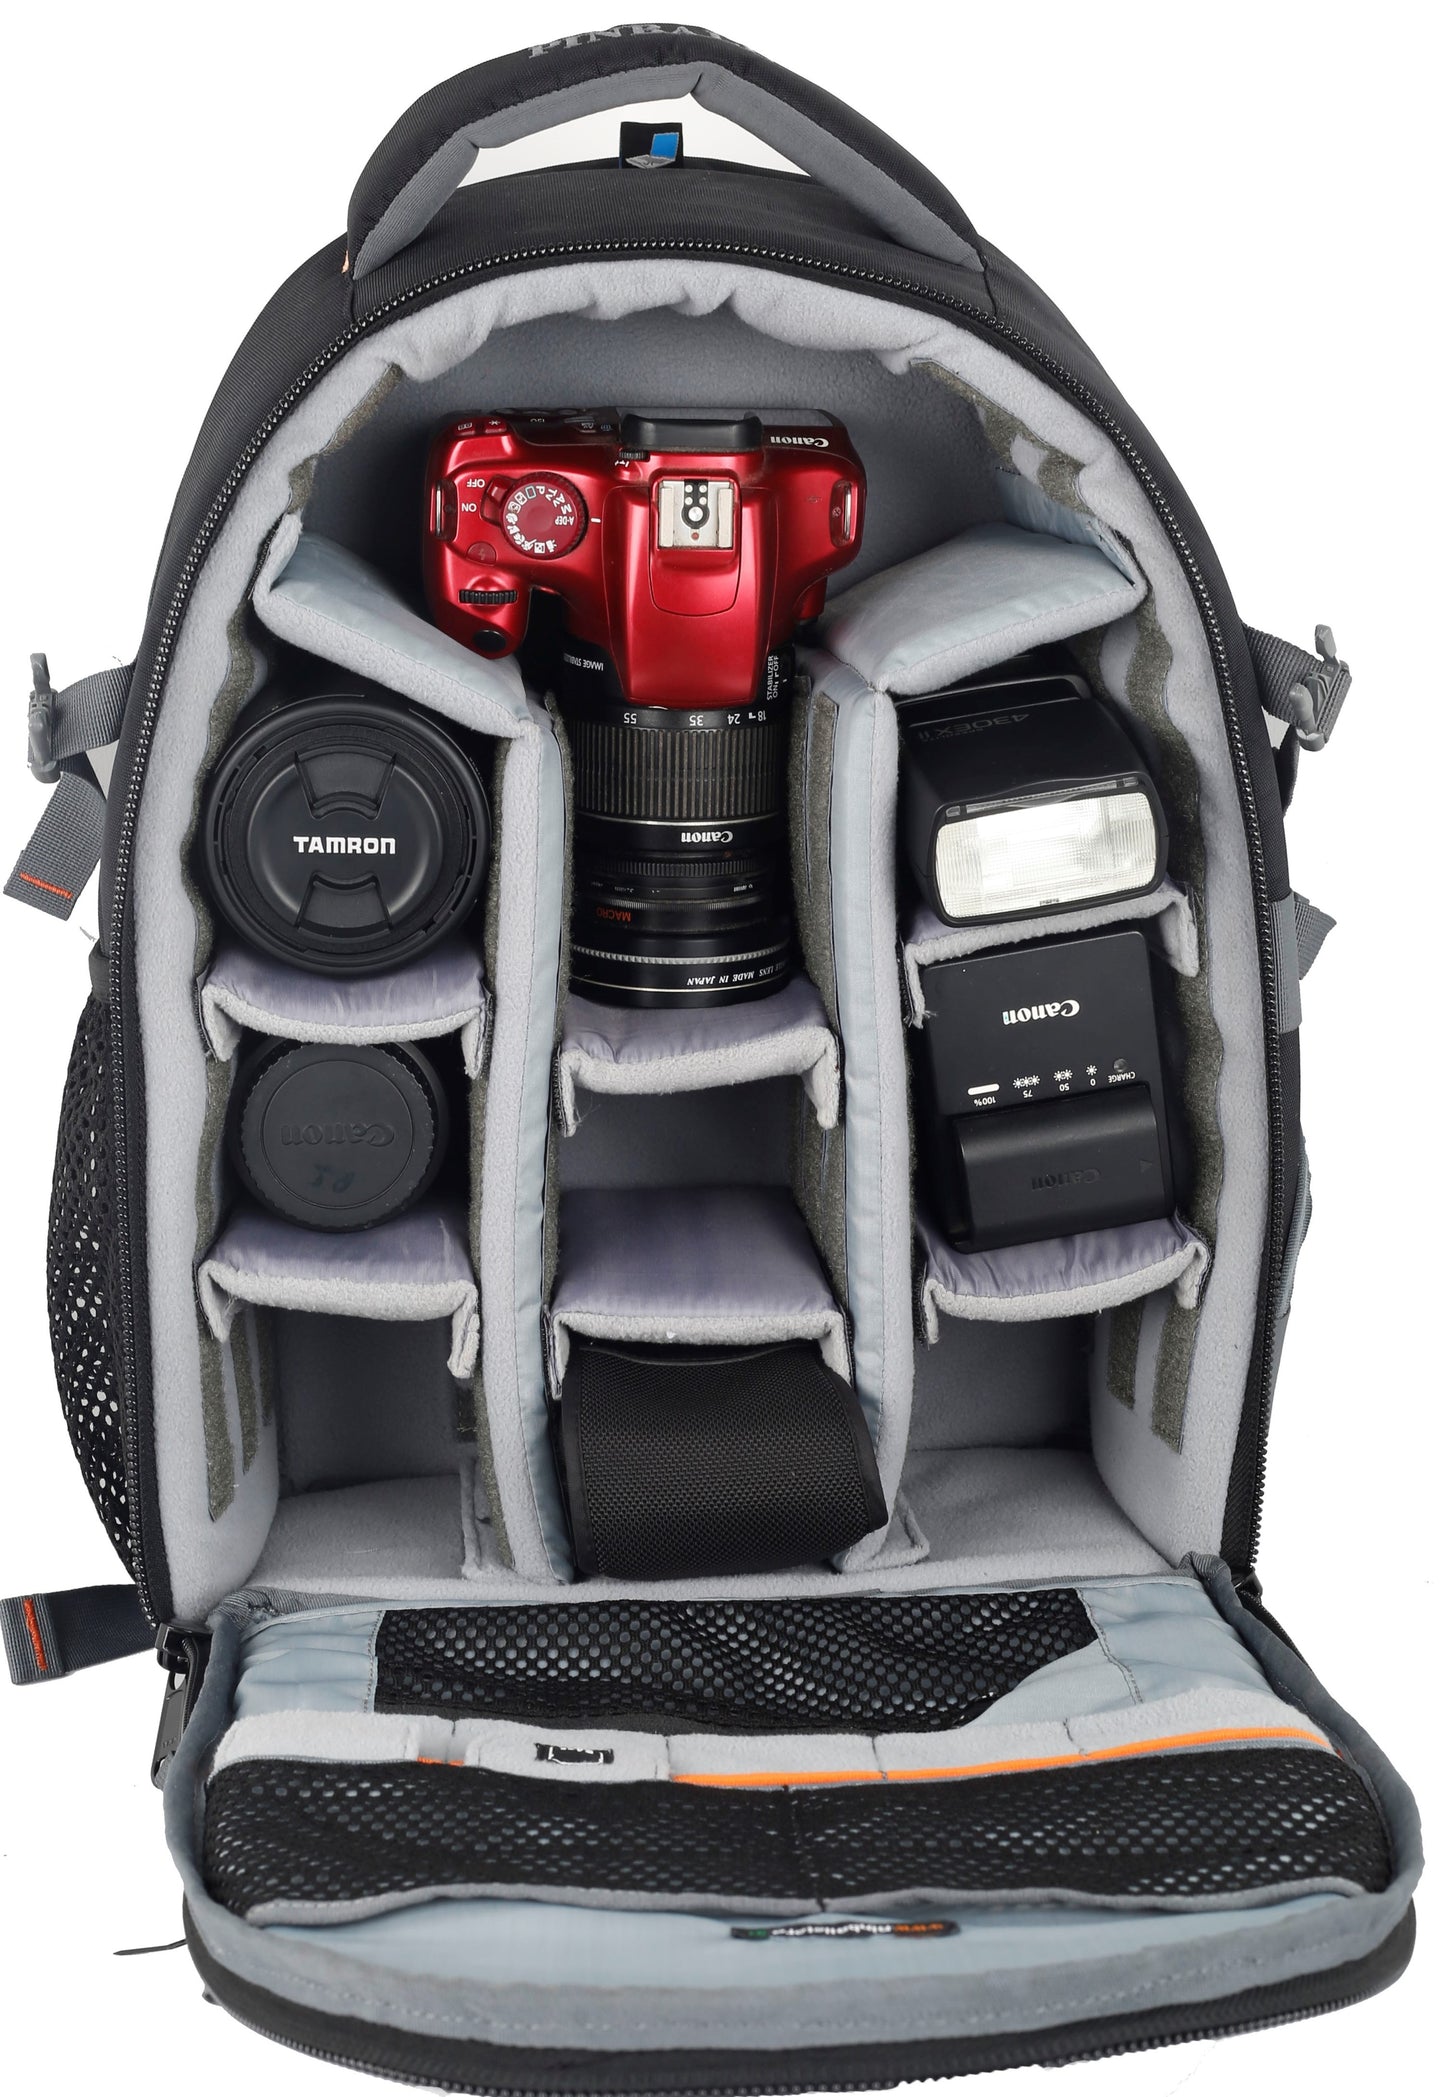 Image: Front view of the open P33 Sniper DSLR camera backpack, displaying its spacious interior with a camera and various equipment neatly organized inside. The bag's compartments and pockets provide secure and convenient storage for camera gear, ensuring easy access and efficient organization during photography sessions or travels.